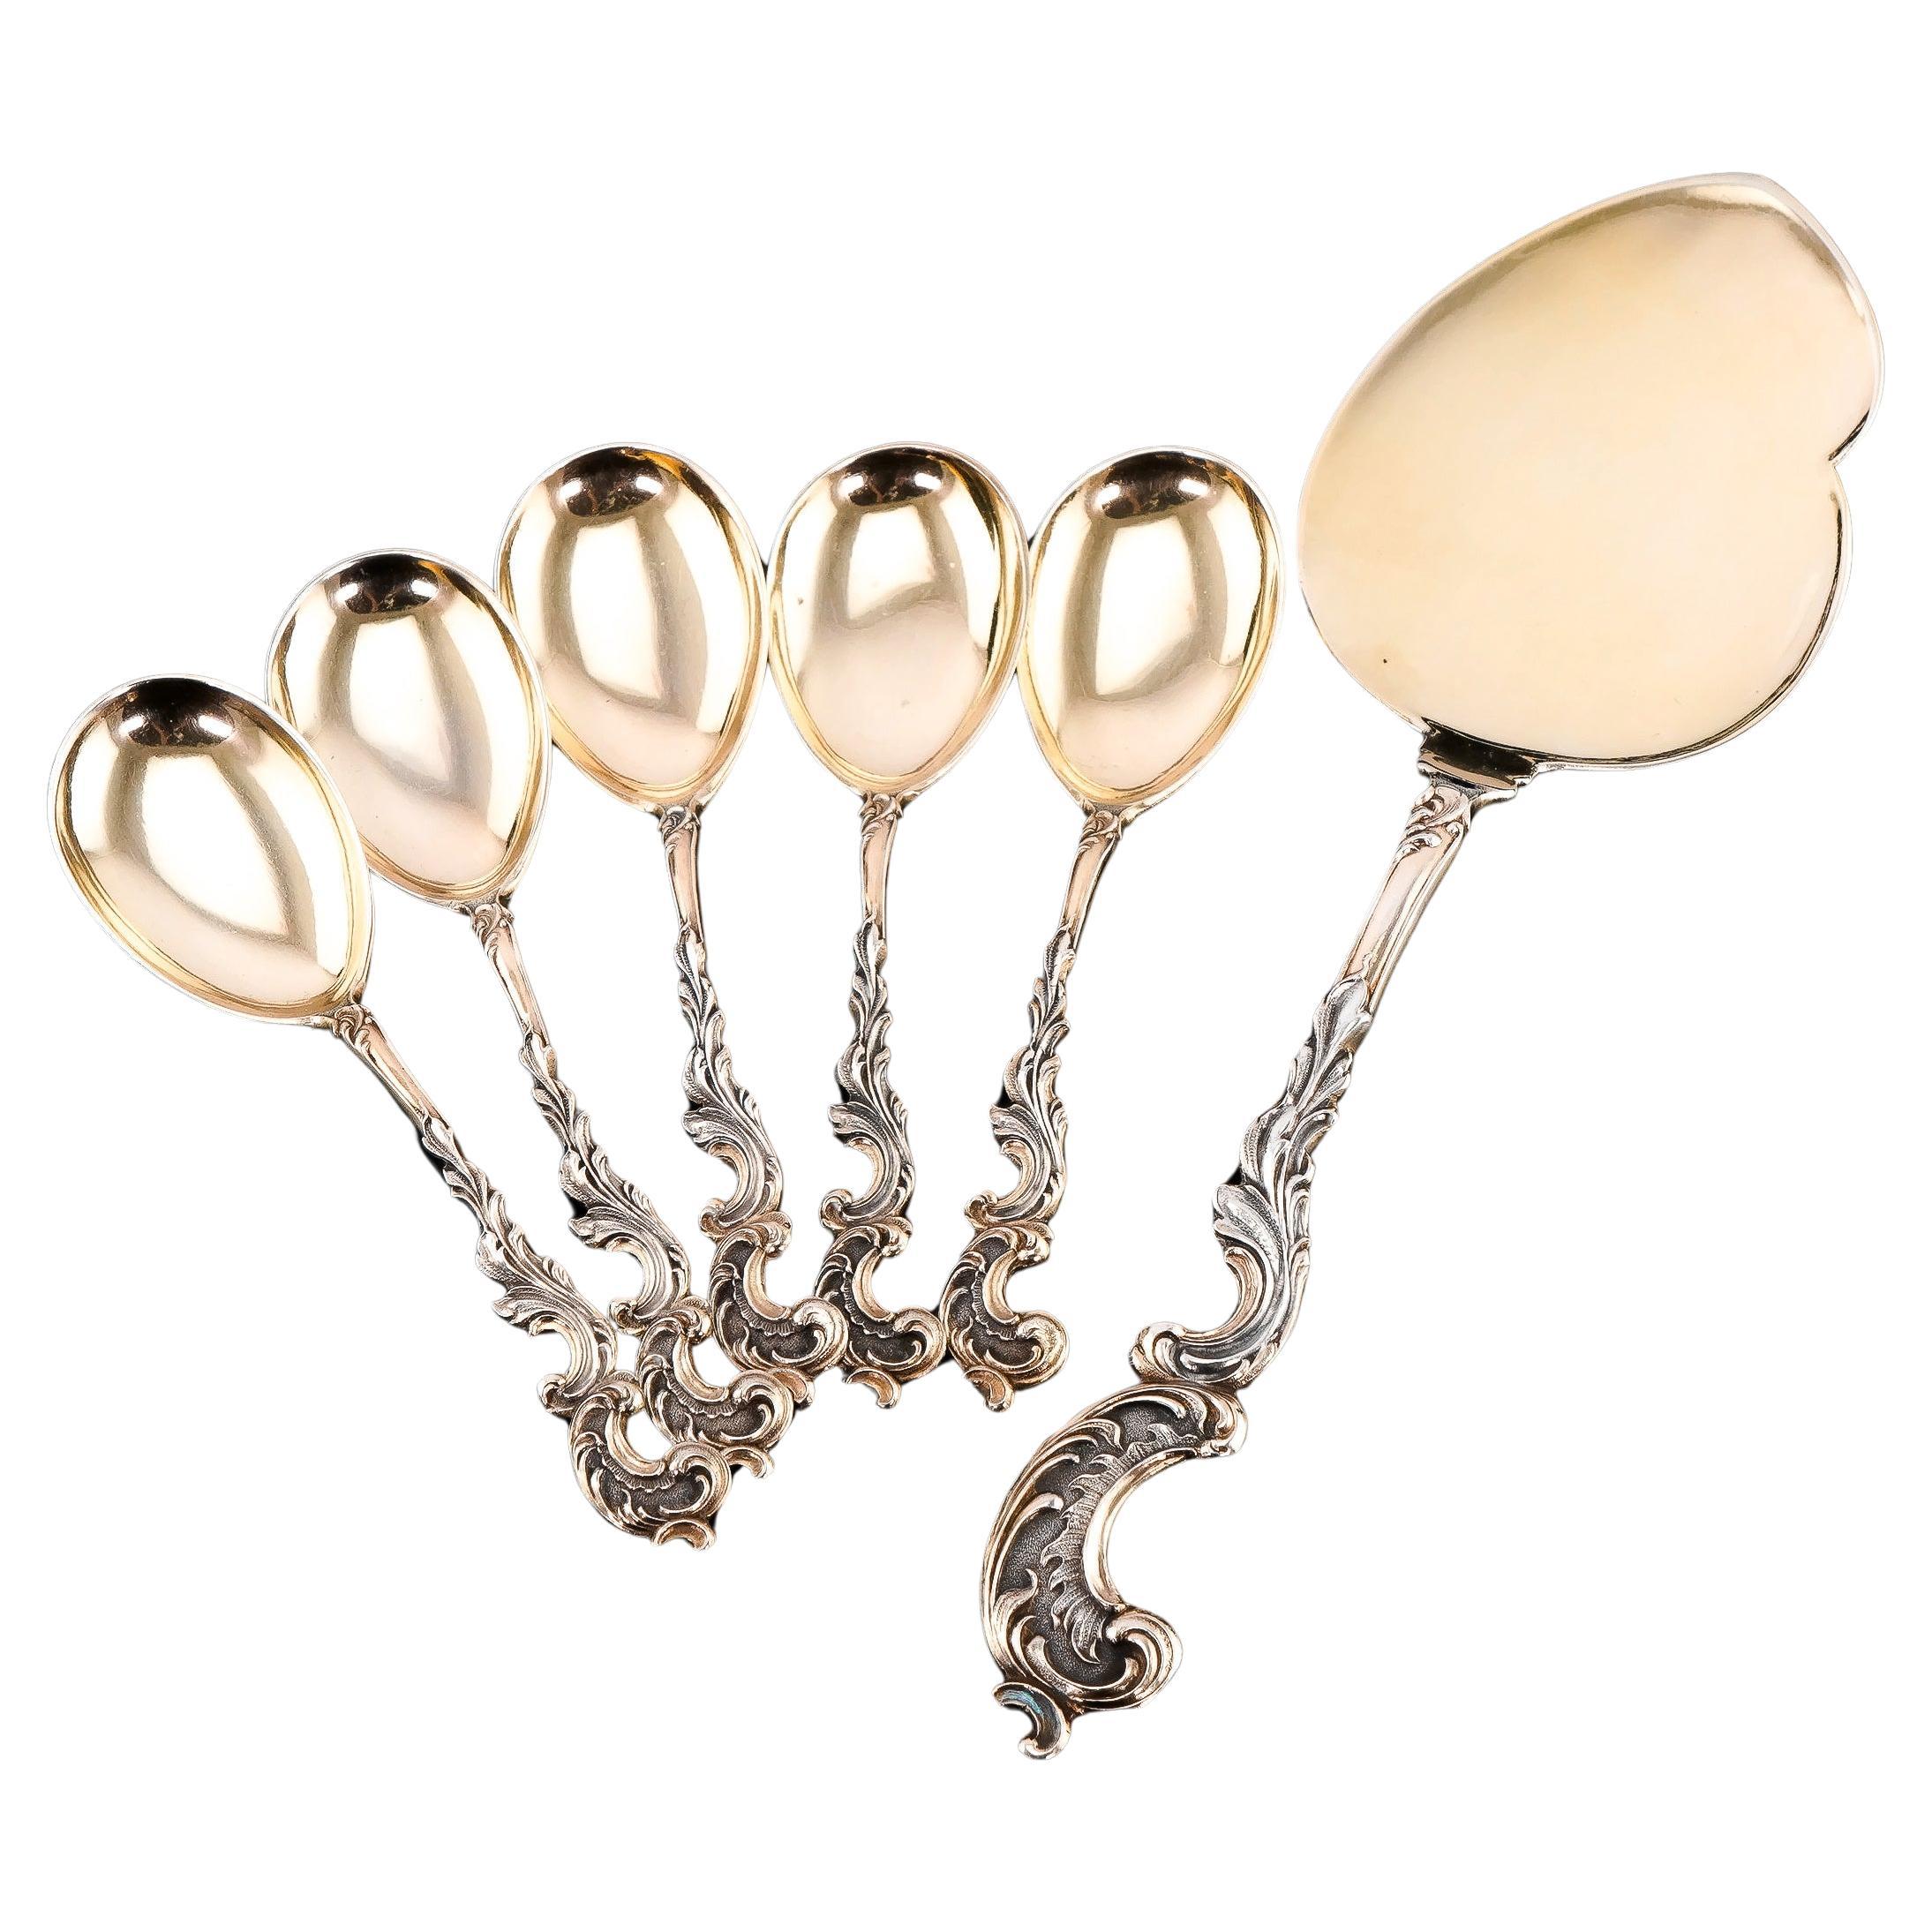 Antique German Solid Silver Icecream Server & Spoons in Rococo Style - c.1900 For Sale